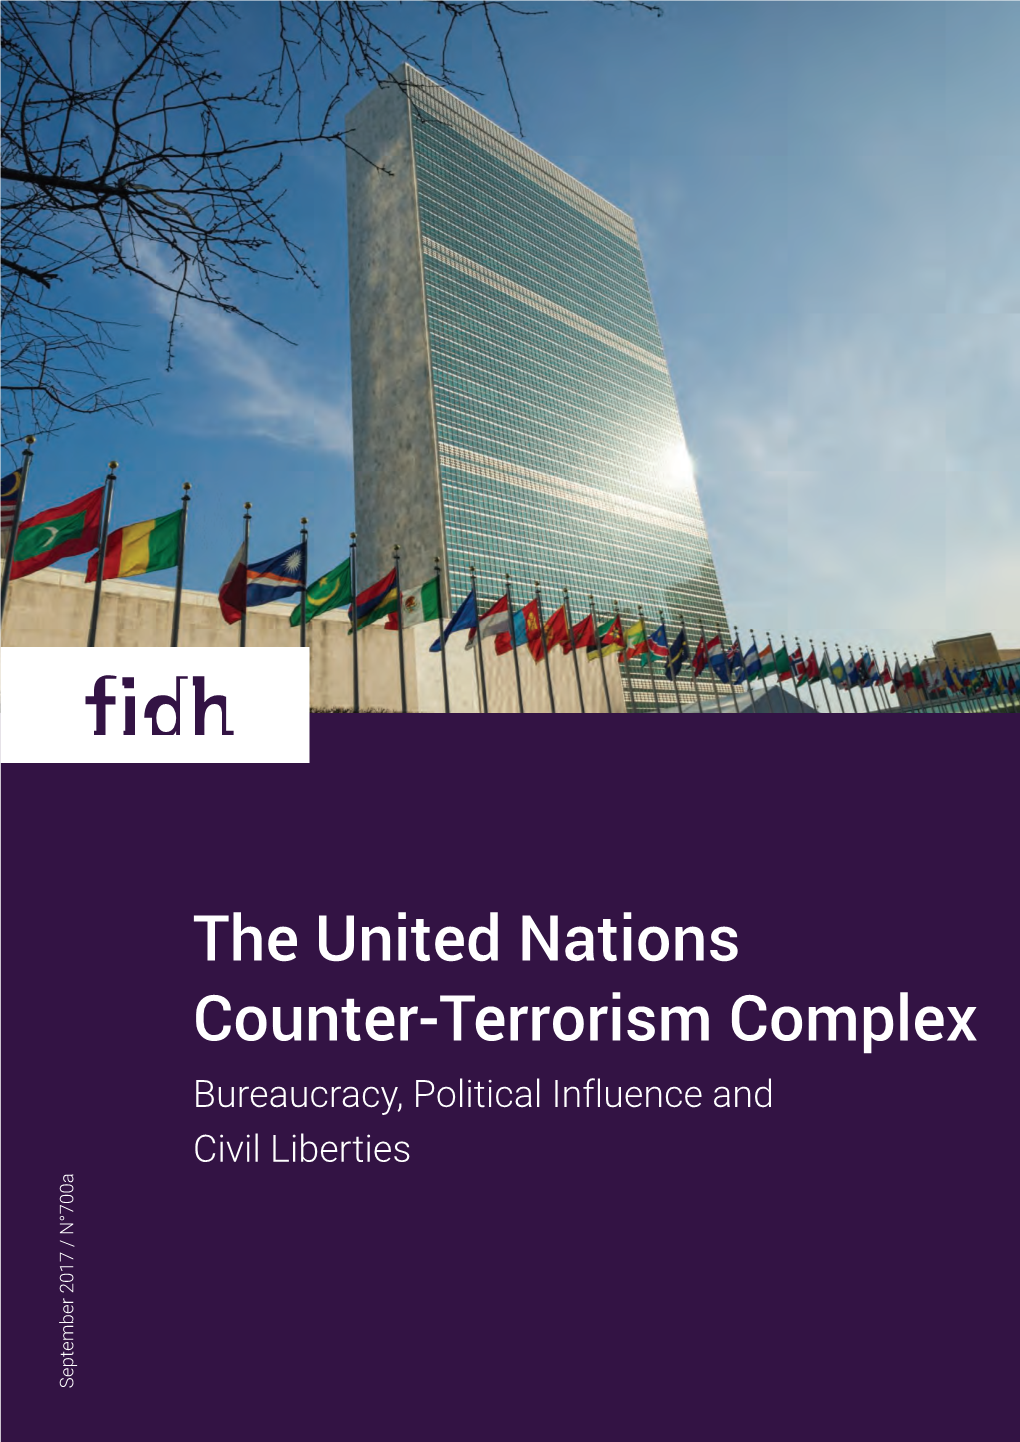 The United Nations Counter-Terrorism Complex Bureaucracy, Political Influence and Civil Liberties